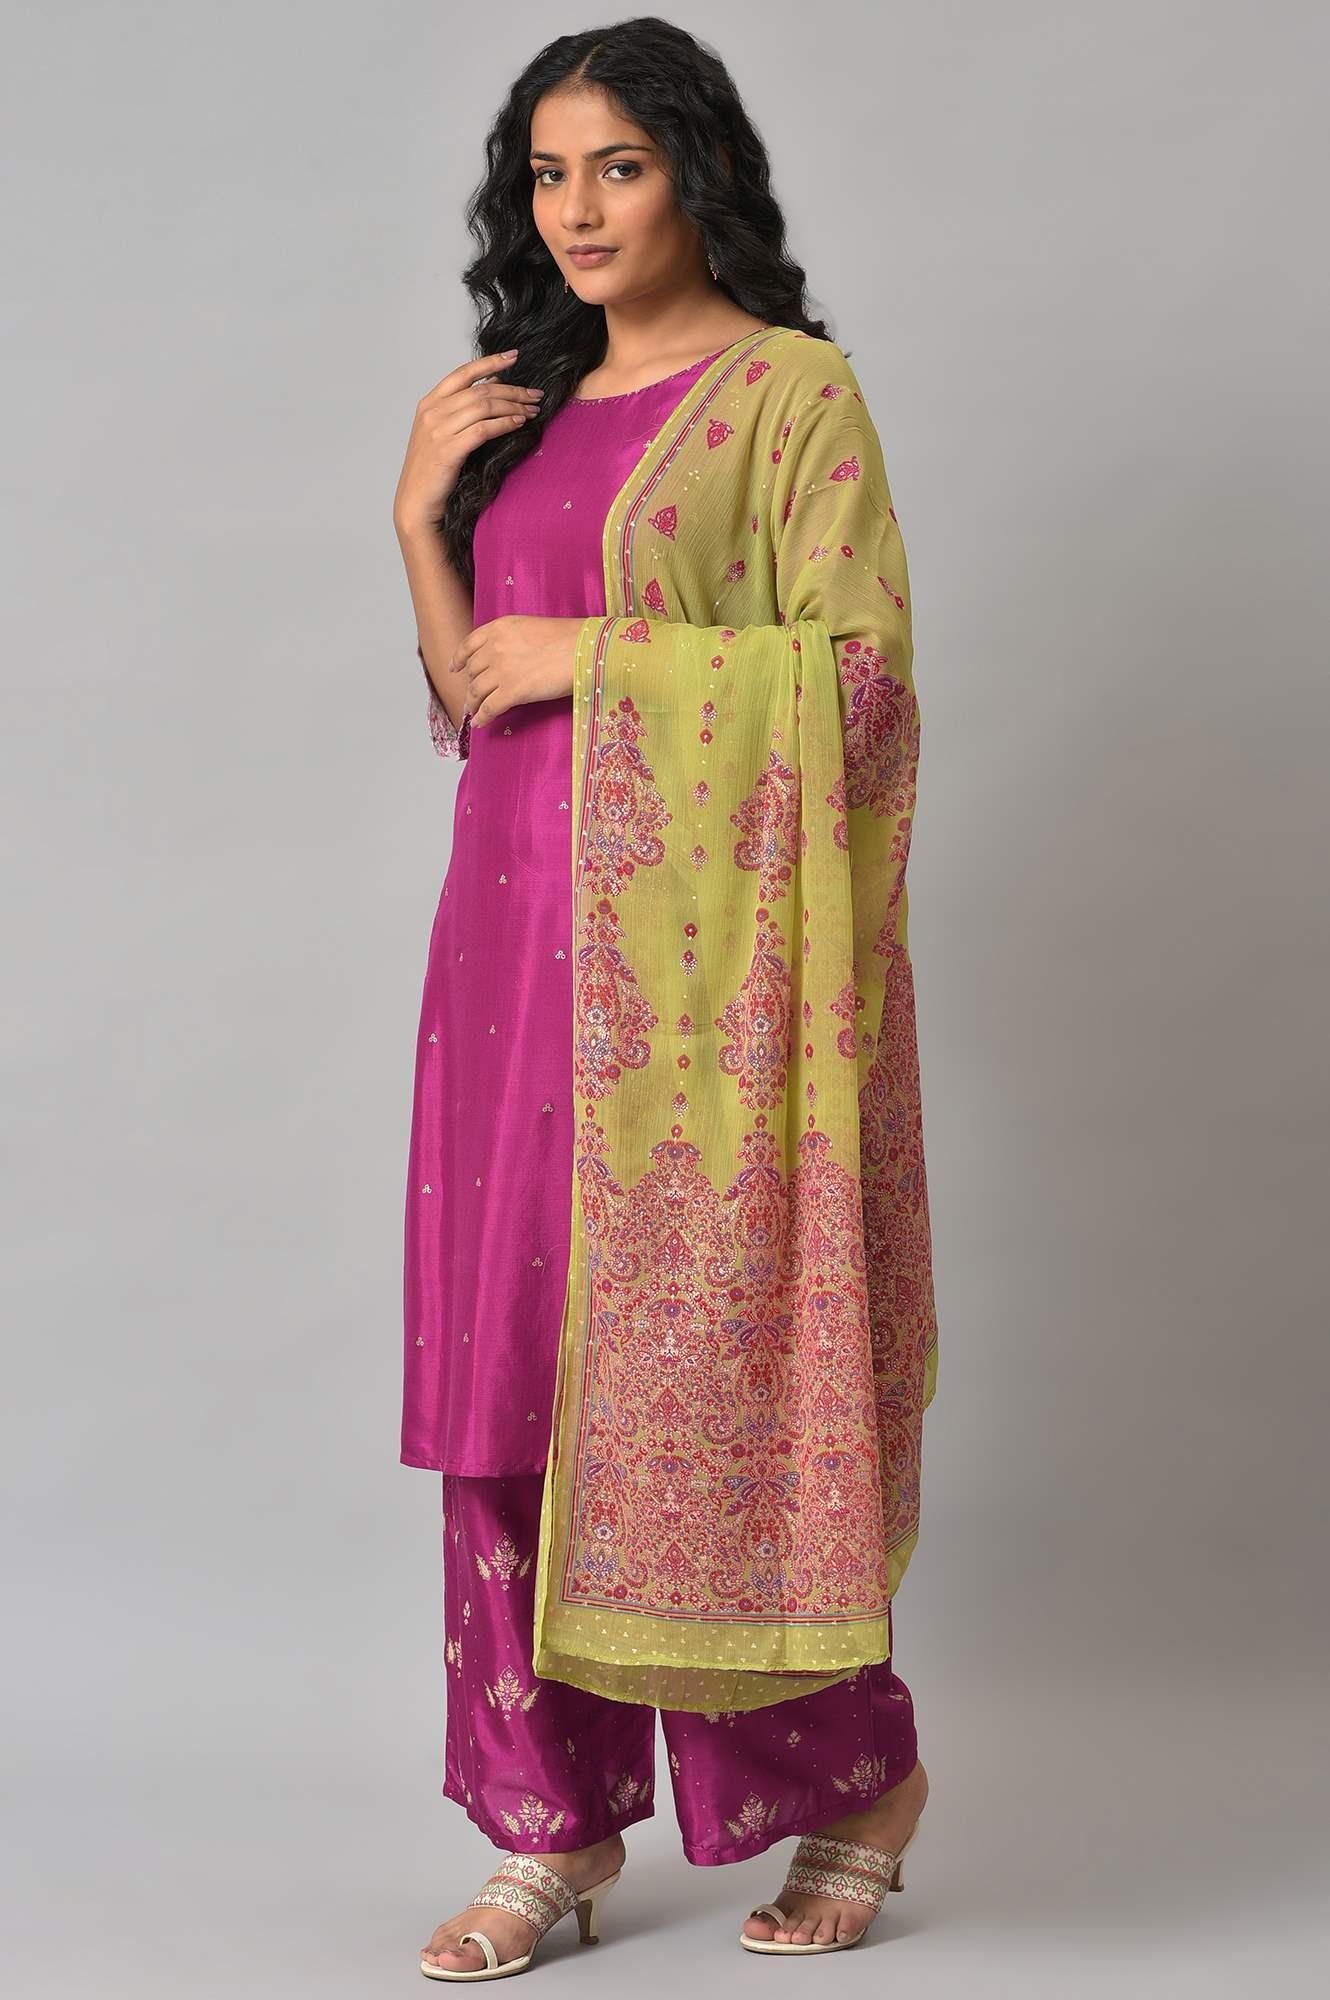 Puruple Shatung Embroidered kurta With Parallel Pants And Light Green Dupatta - wforwoman